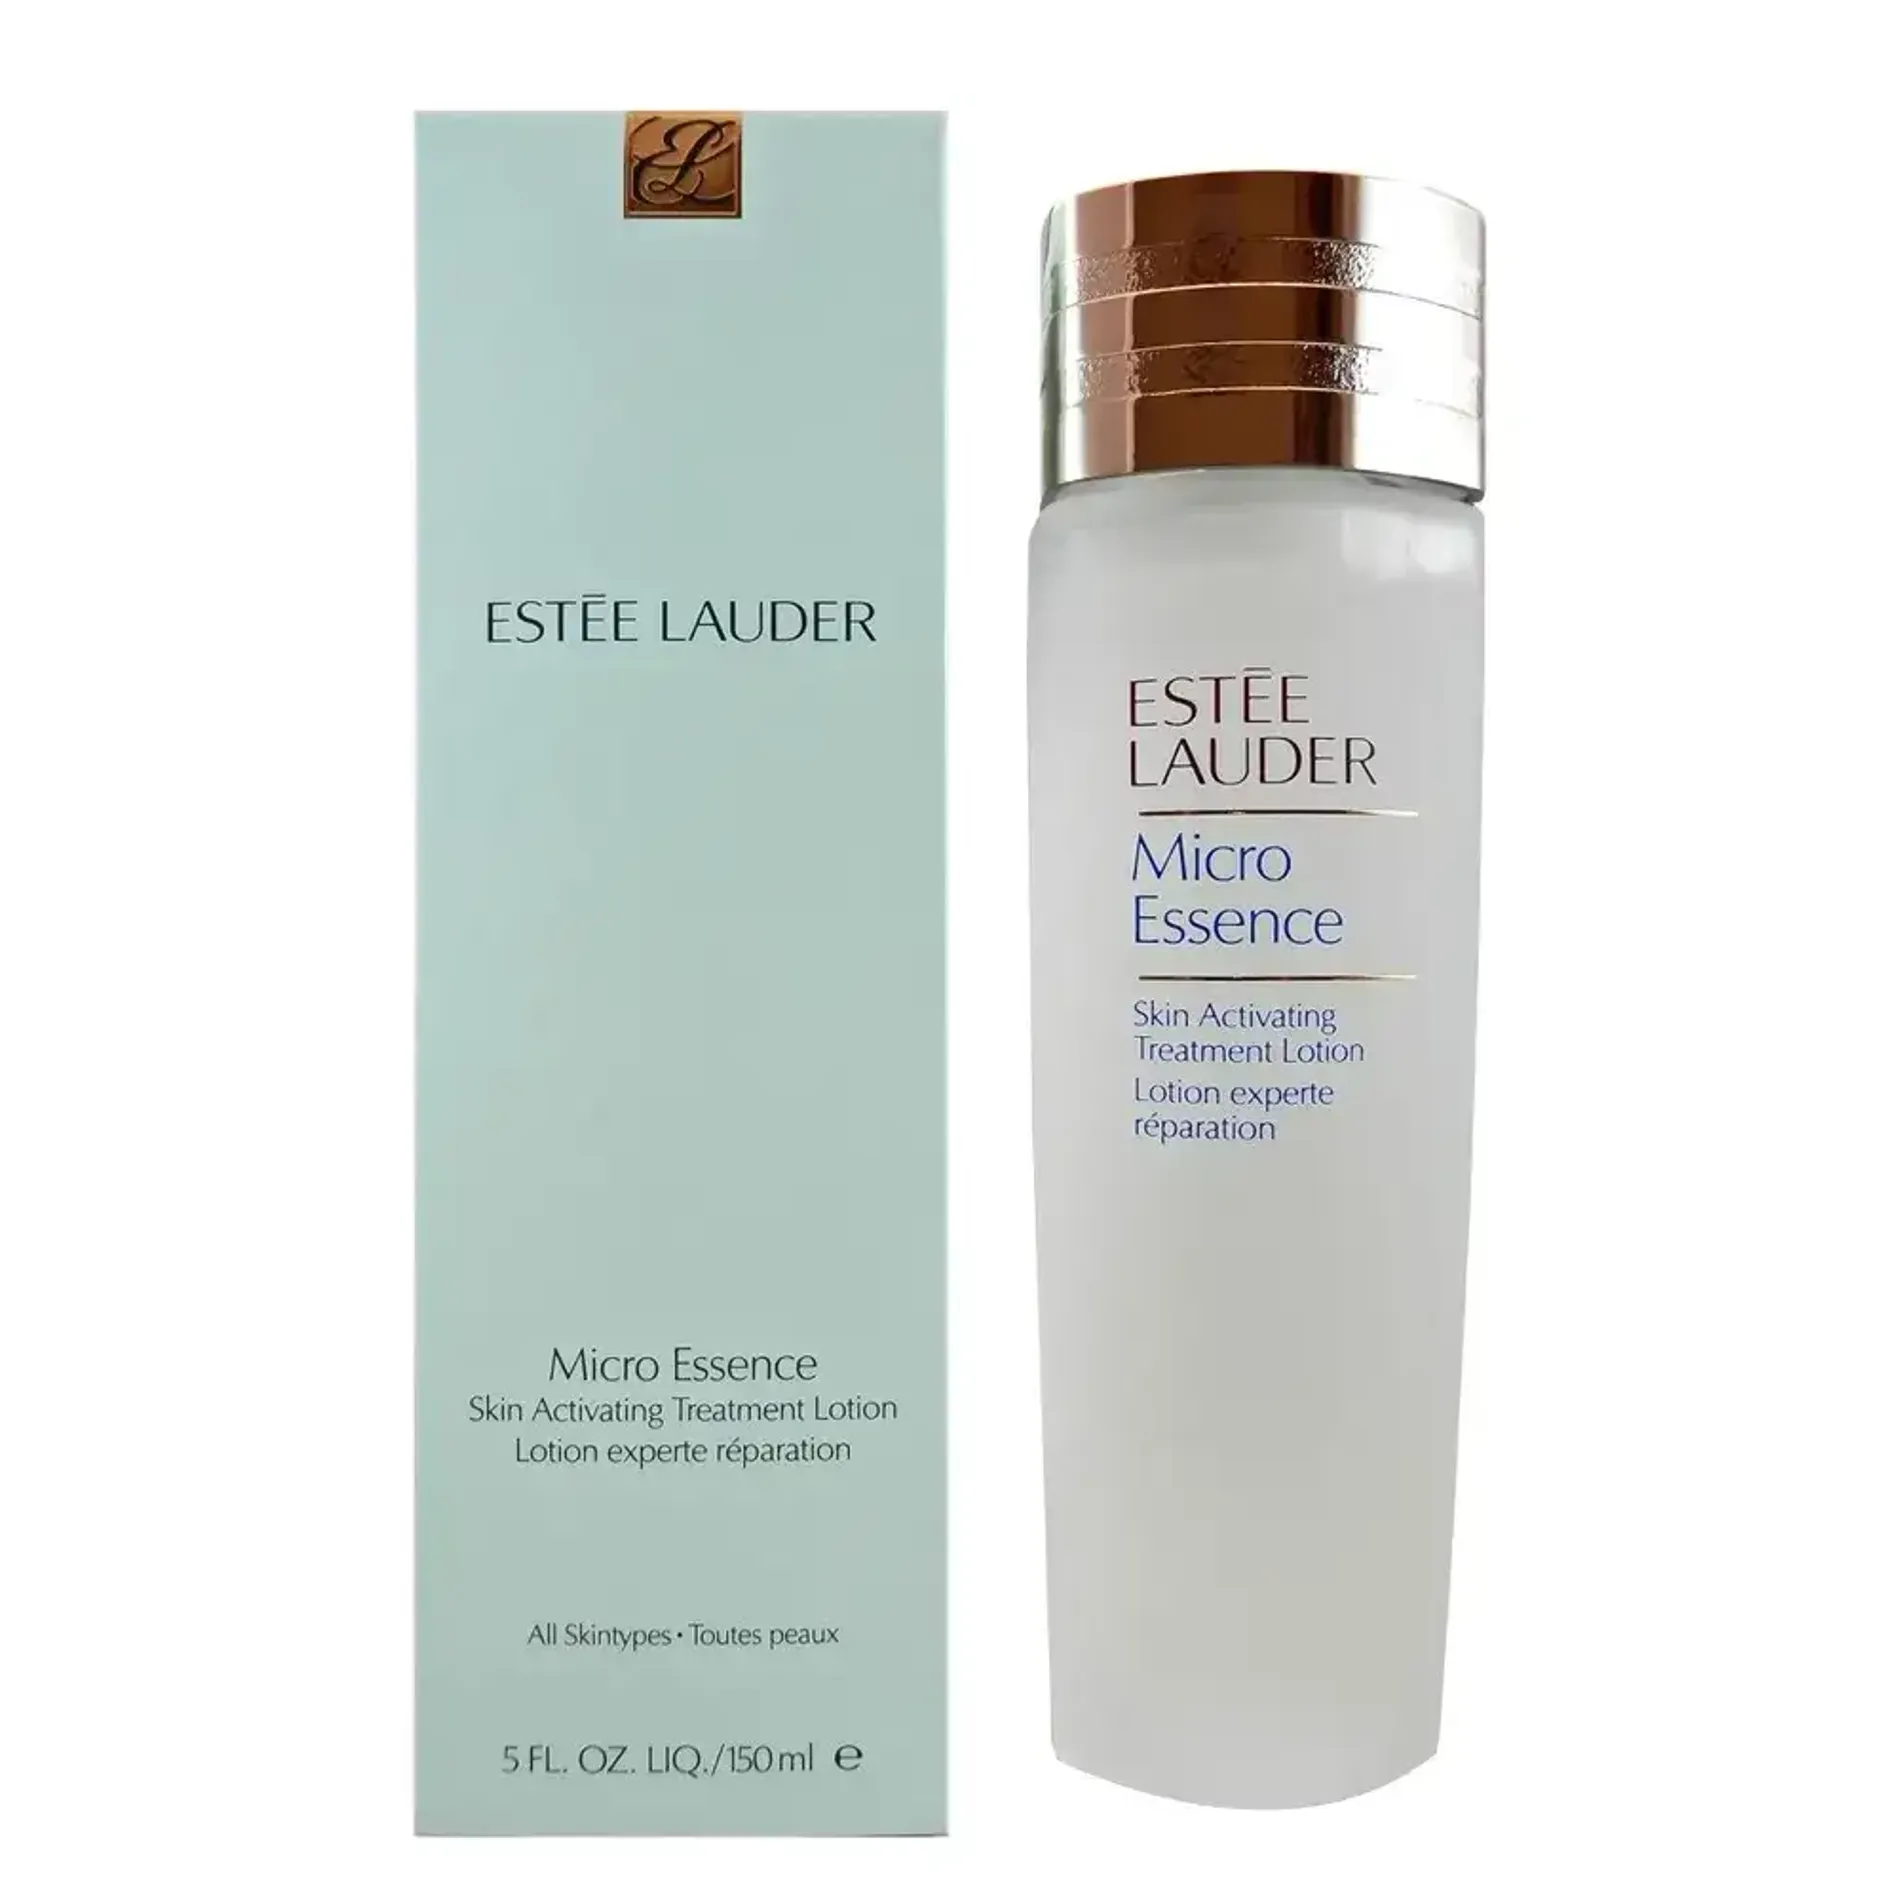 nuoc-than-duong-da-estee-lauder-micro-essence-skin-activating-treatment-lotion-150ml-1